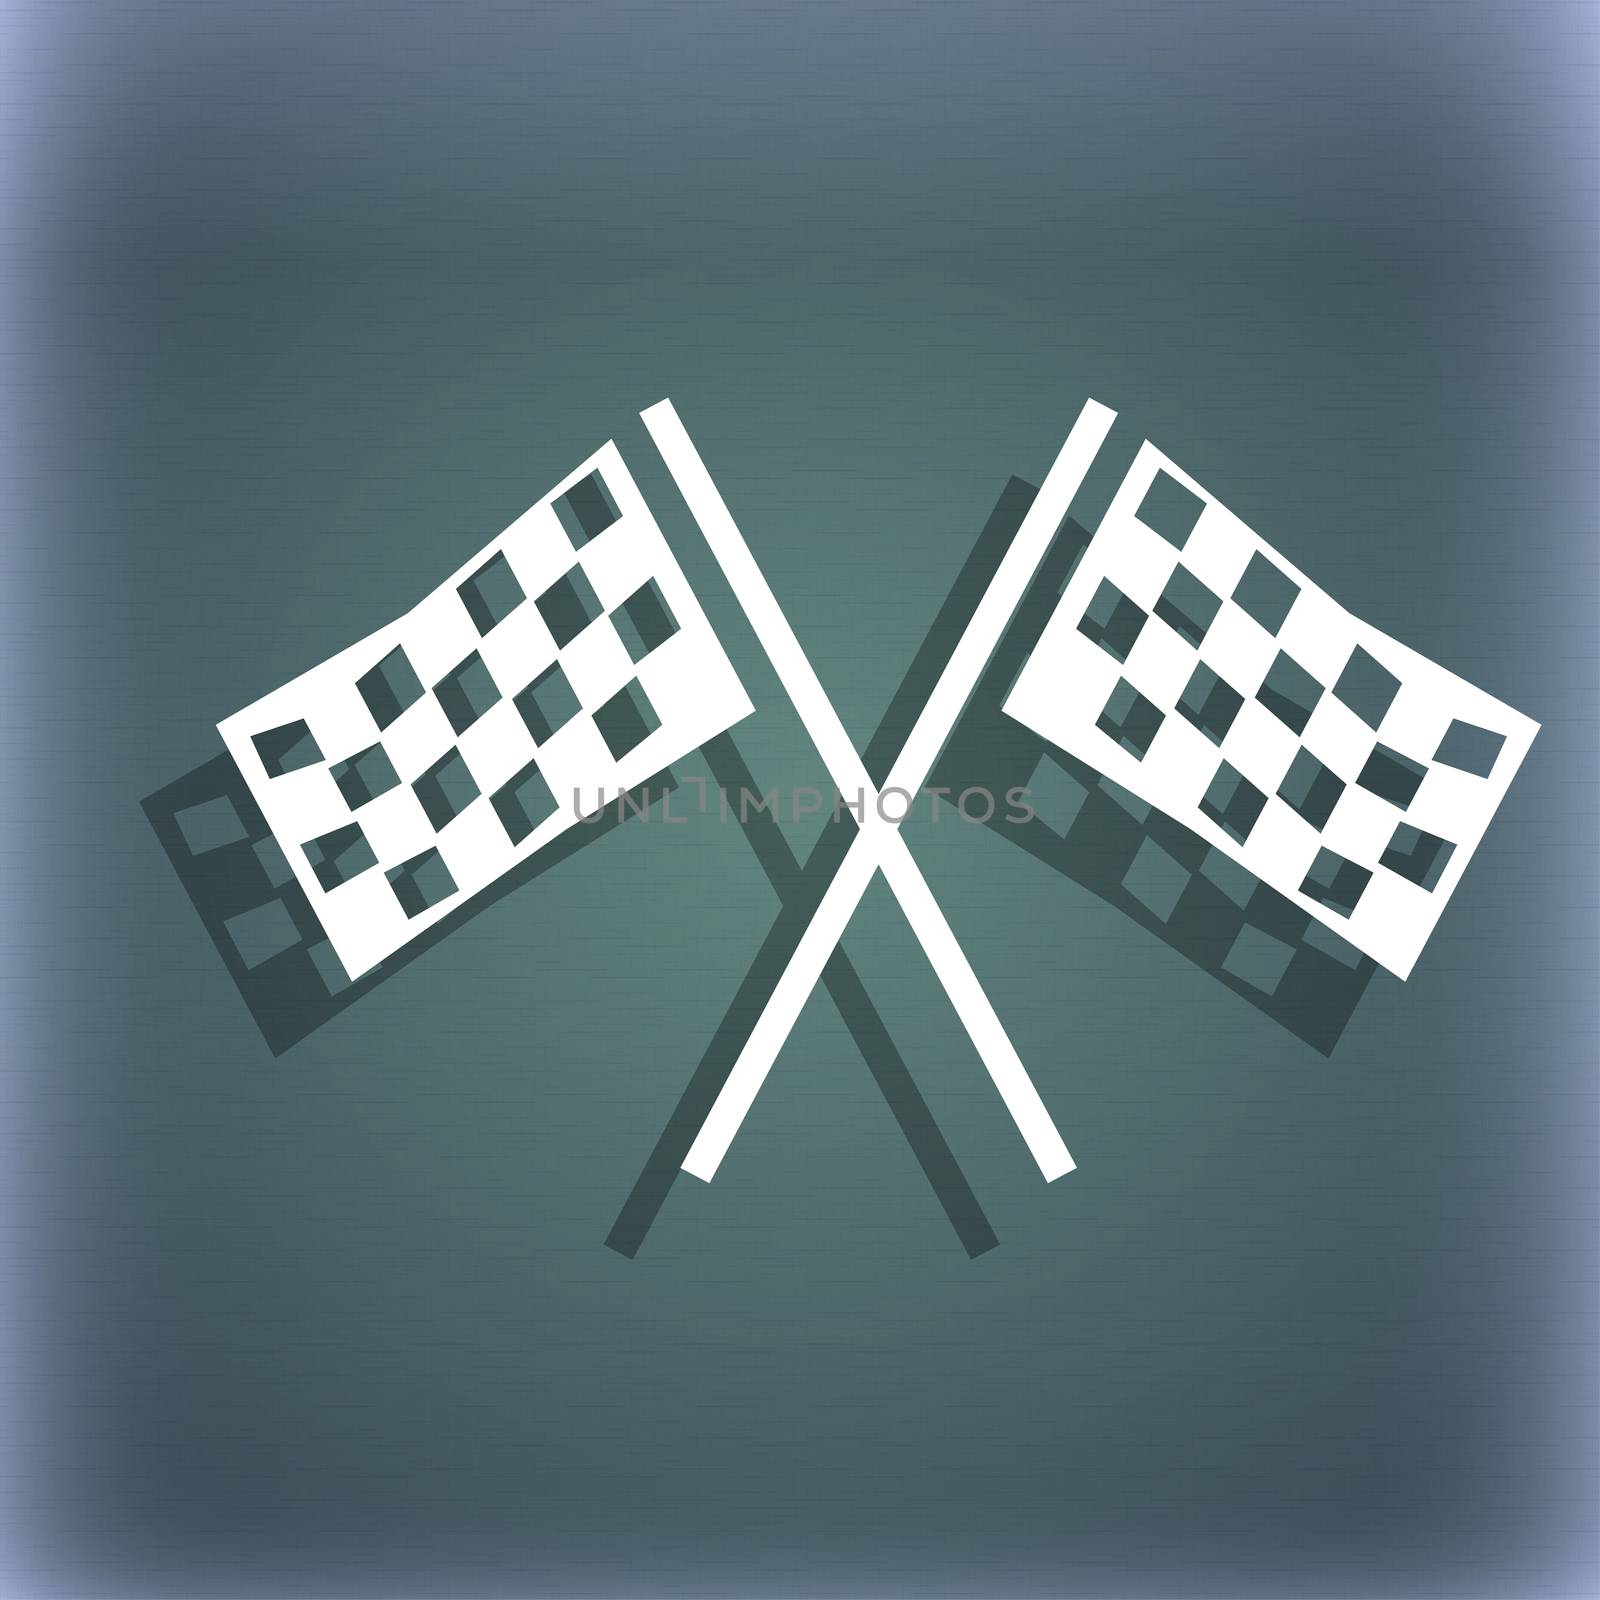 Race Flag Finish icon sign. On the blue-green abstract background with shadow and space for your text. illustration